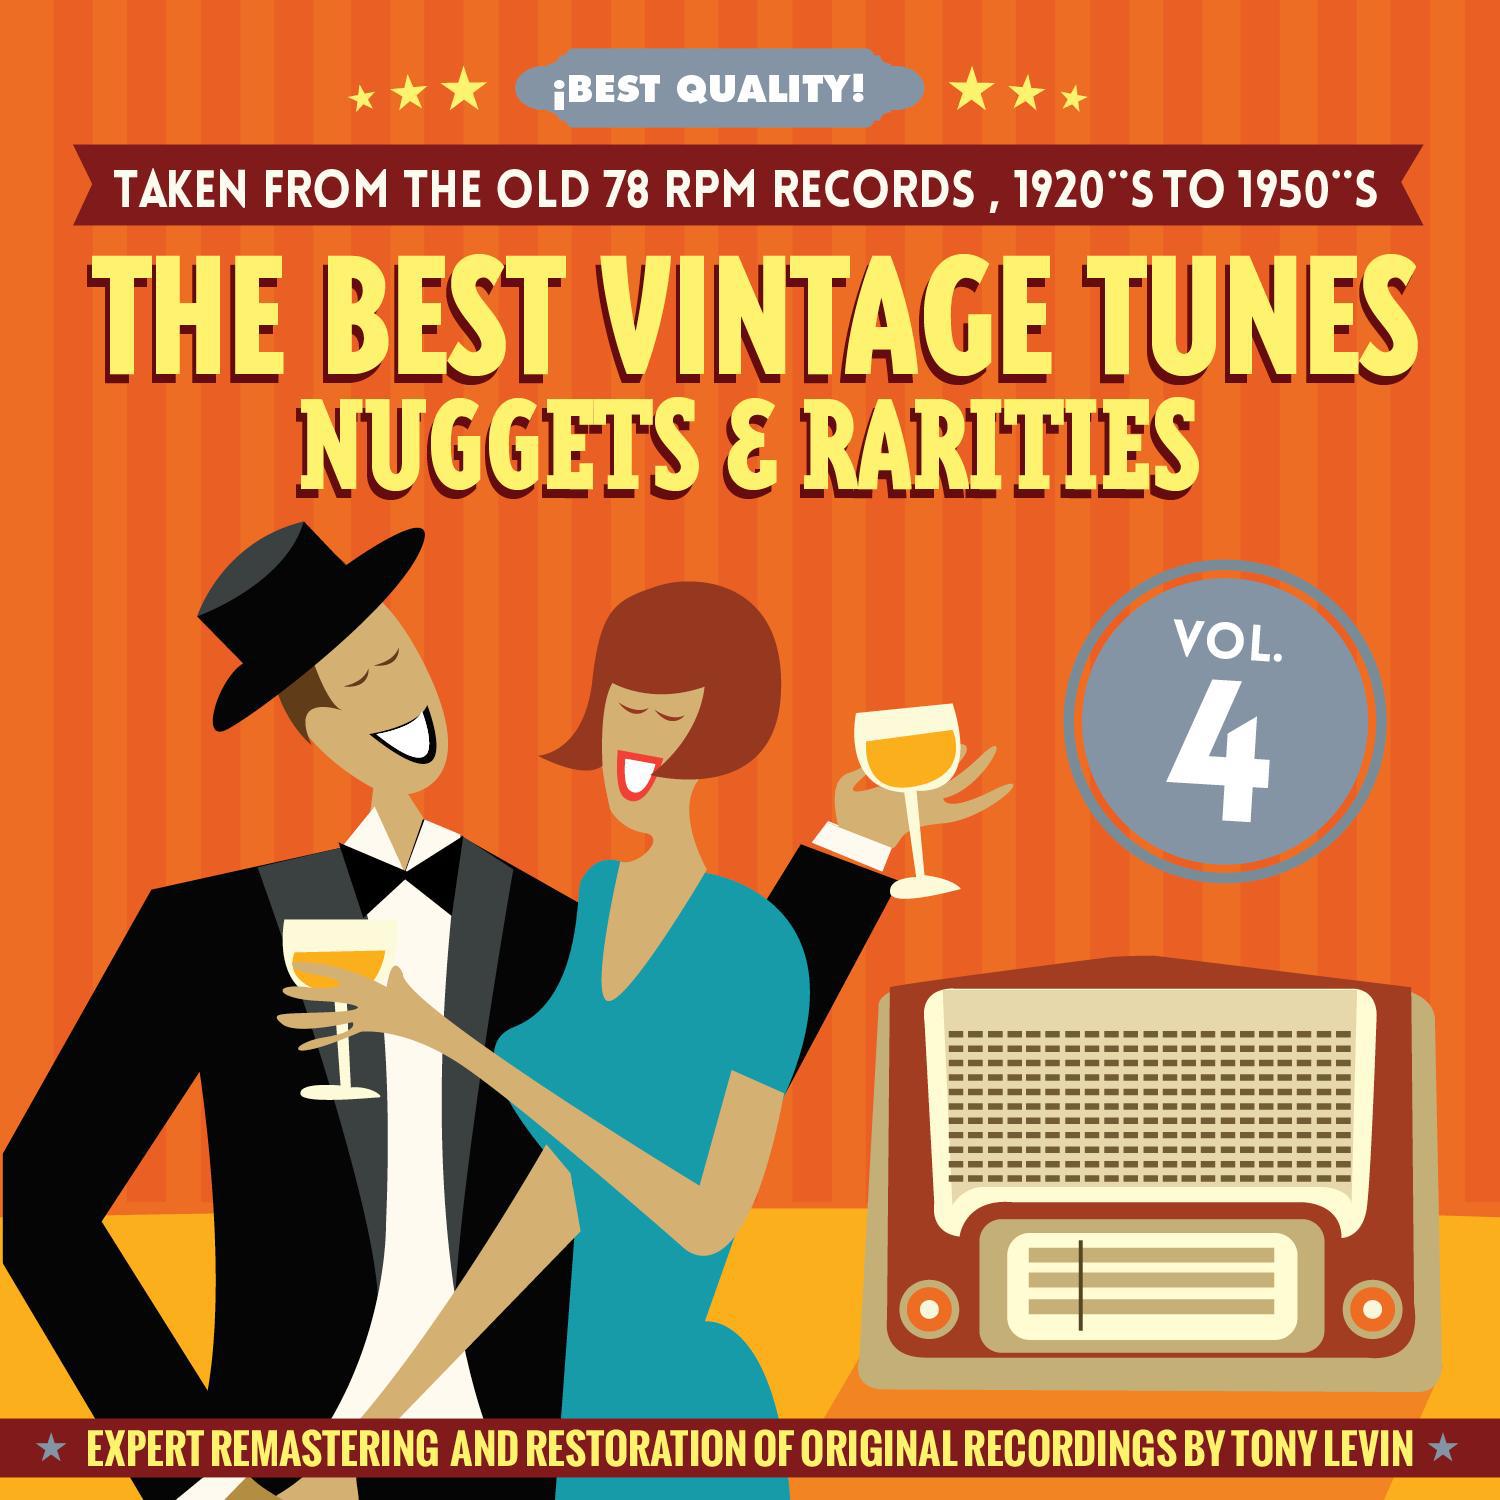 The Best Vintage Tunes. Nuggets  Rarities Best Quality! Vol. 4